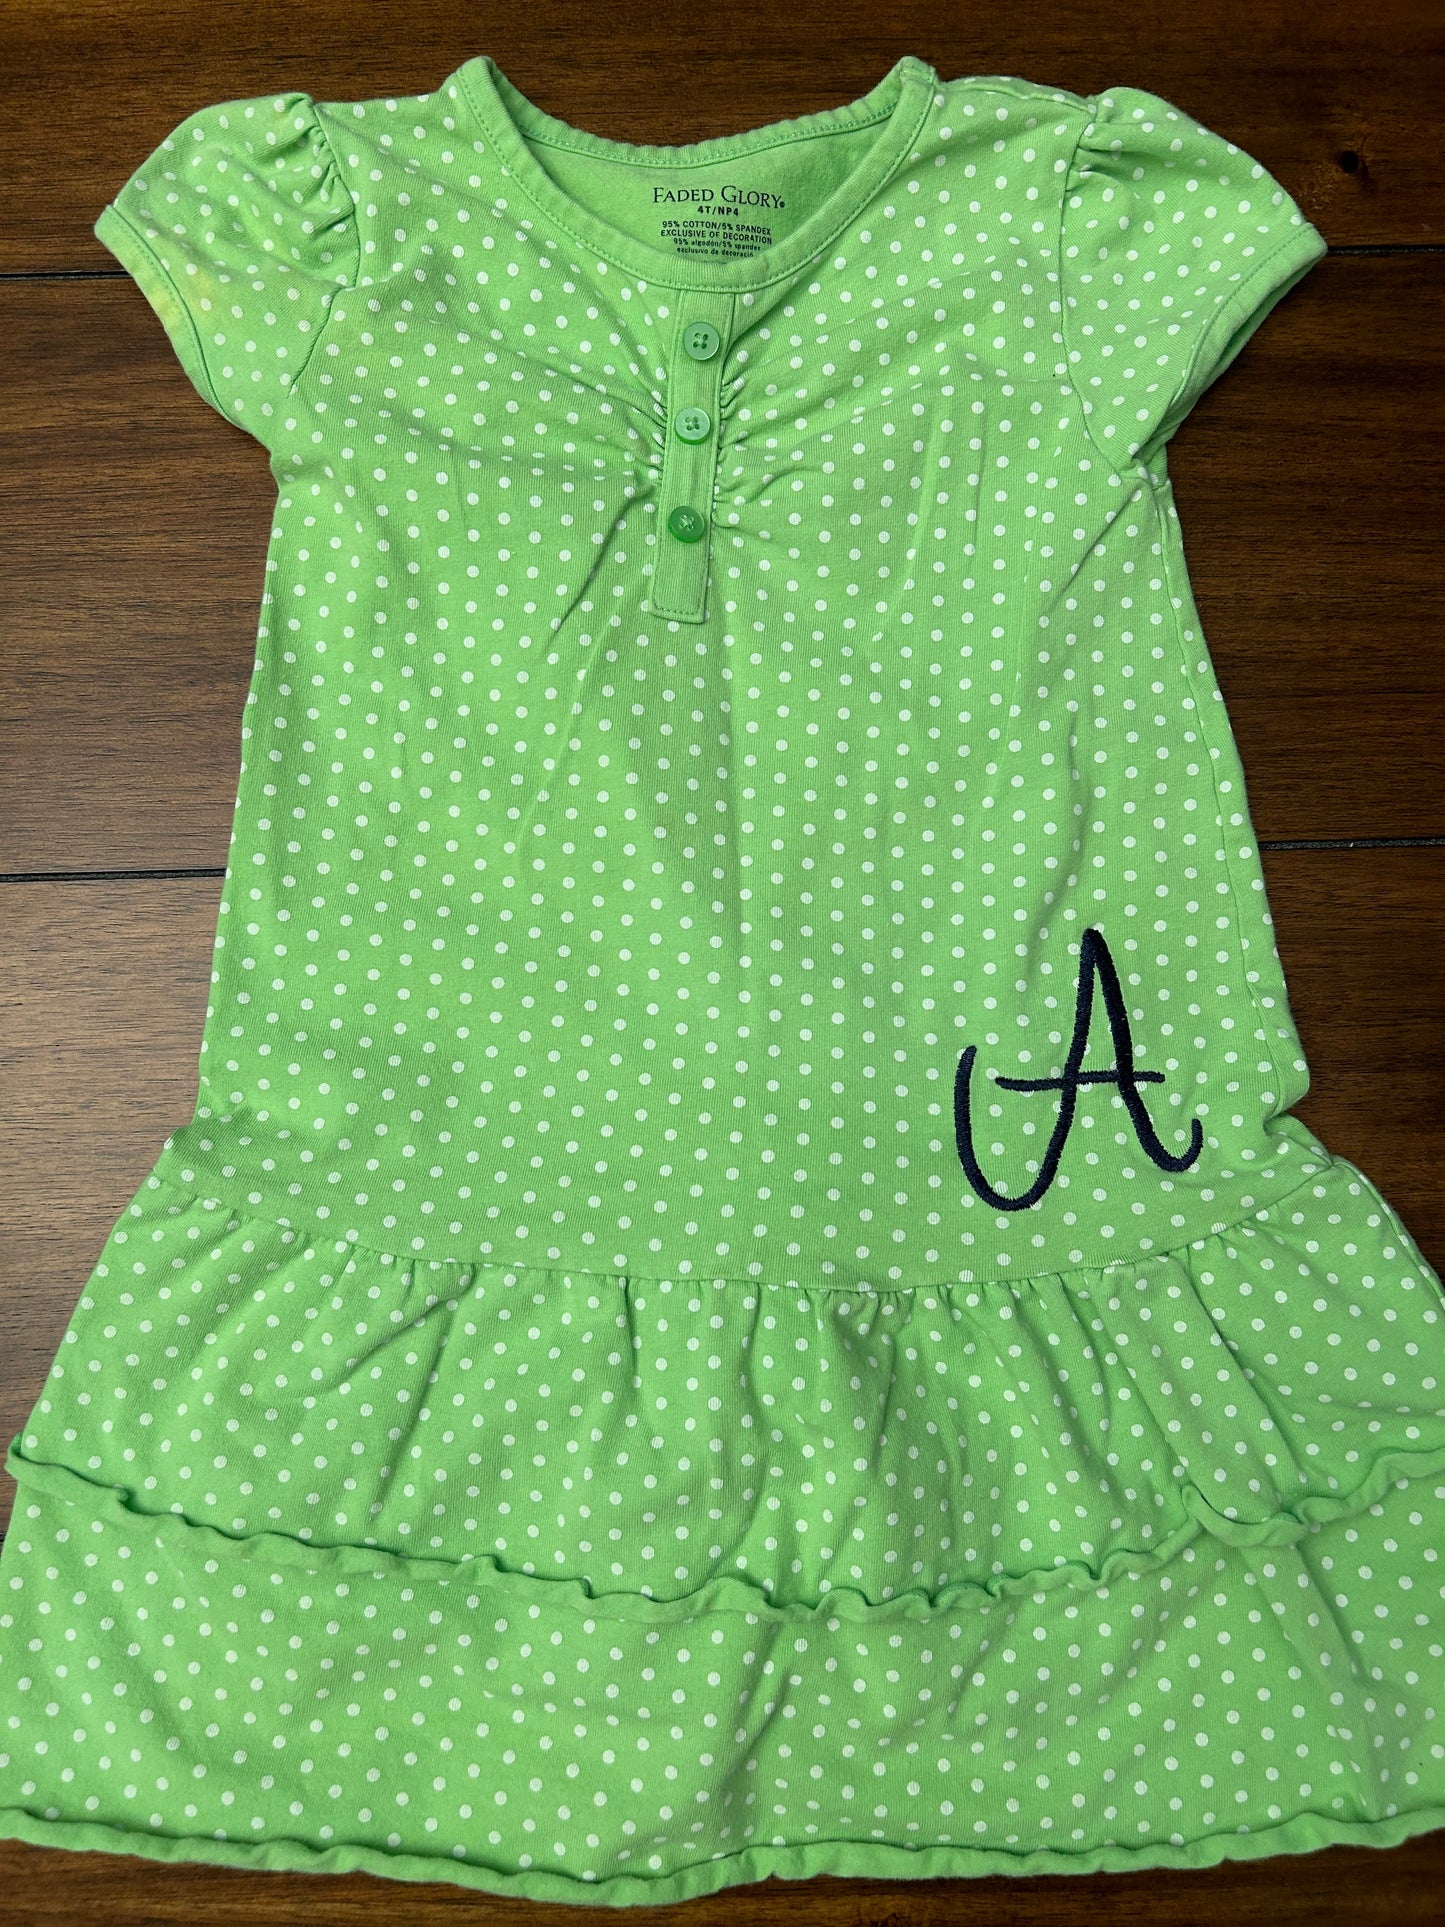 Faded Glory Girls Lime Green White Polka Dotted Dress with Navy Embroidered "A" Size 4T PPU 45040